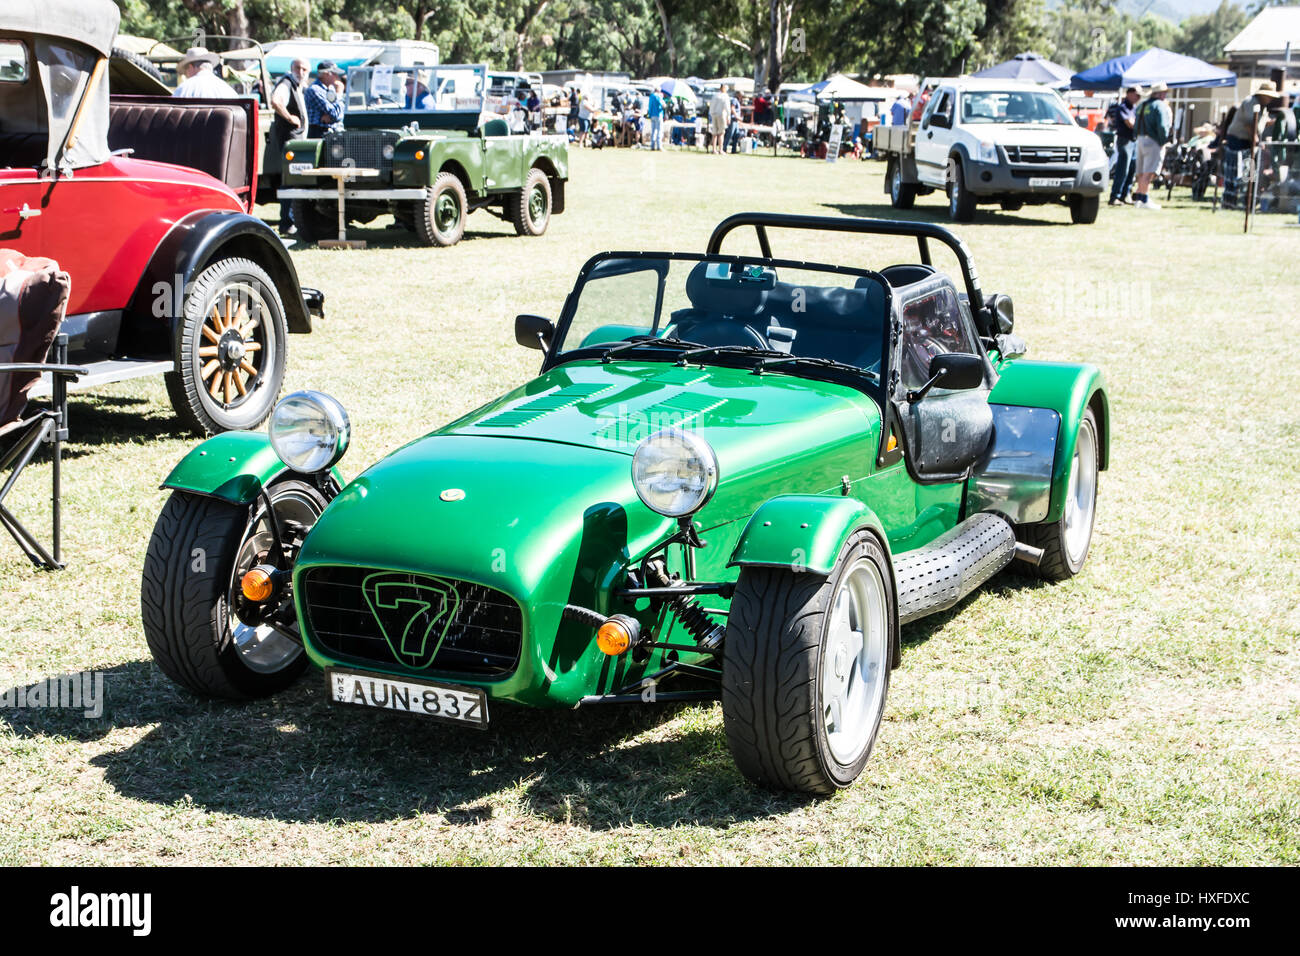 Caterham Super 7 Sports Car on display at a field day Australia. Stock Photo